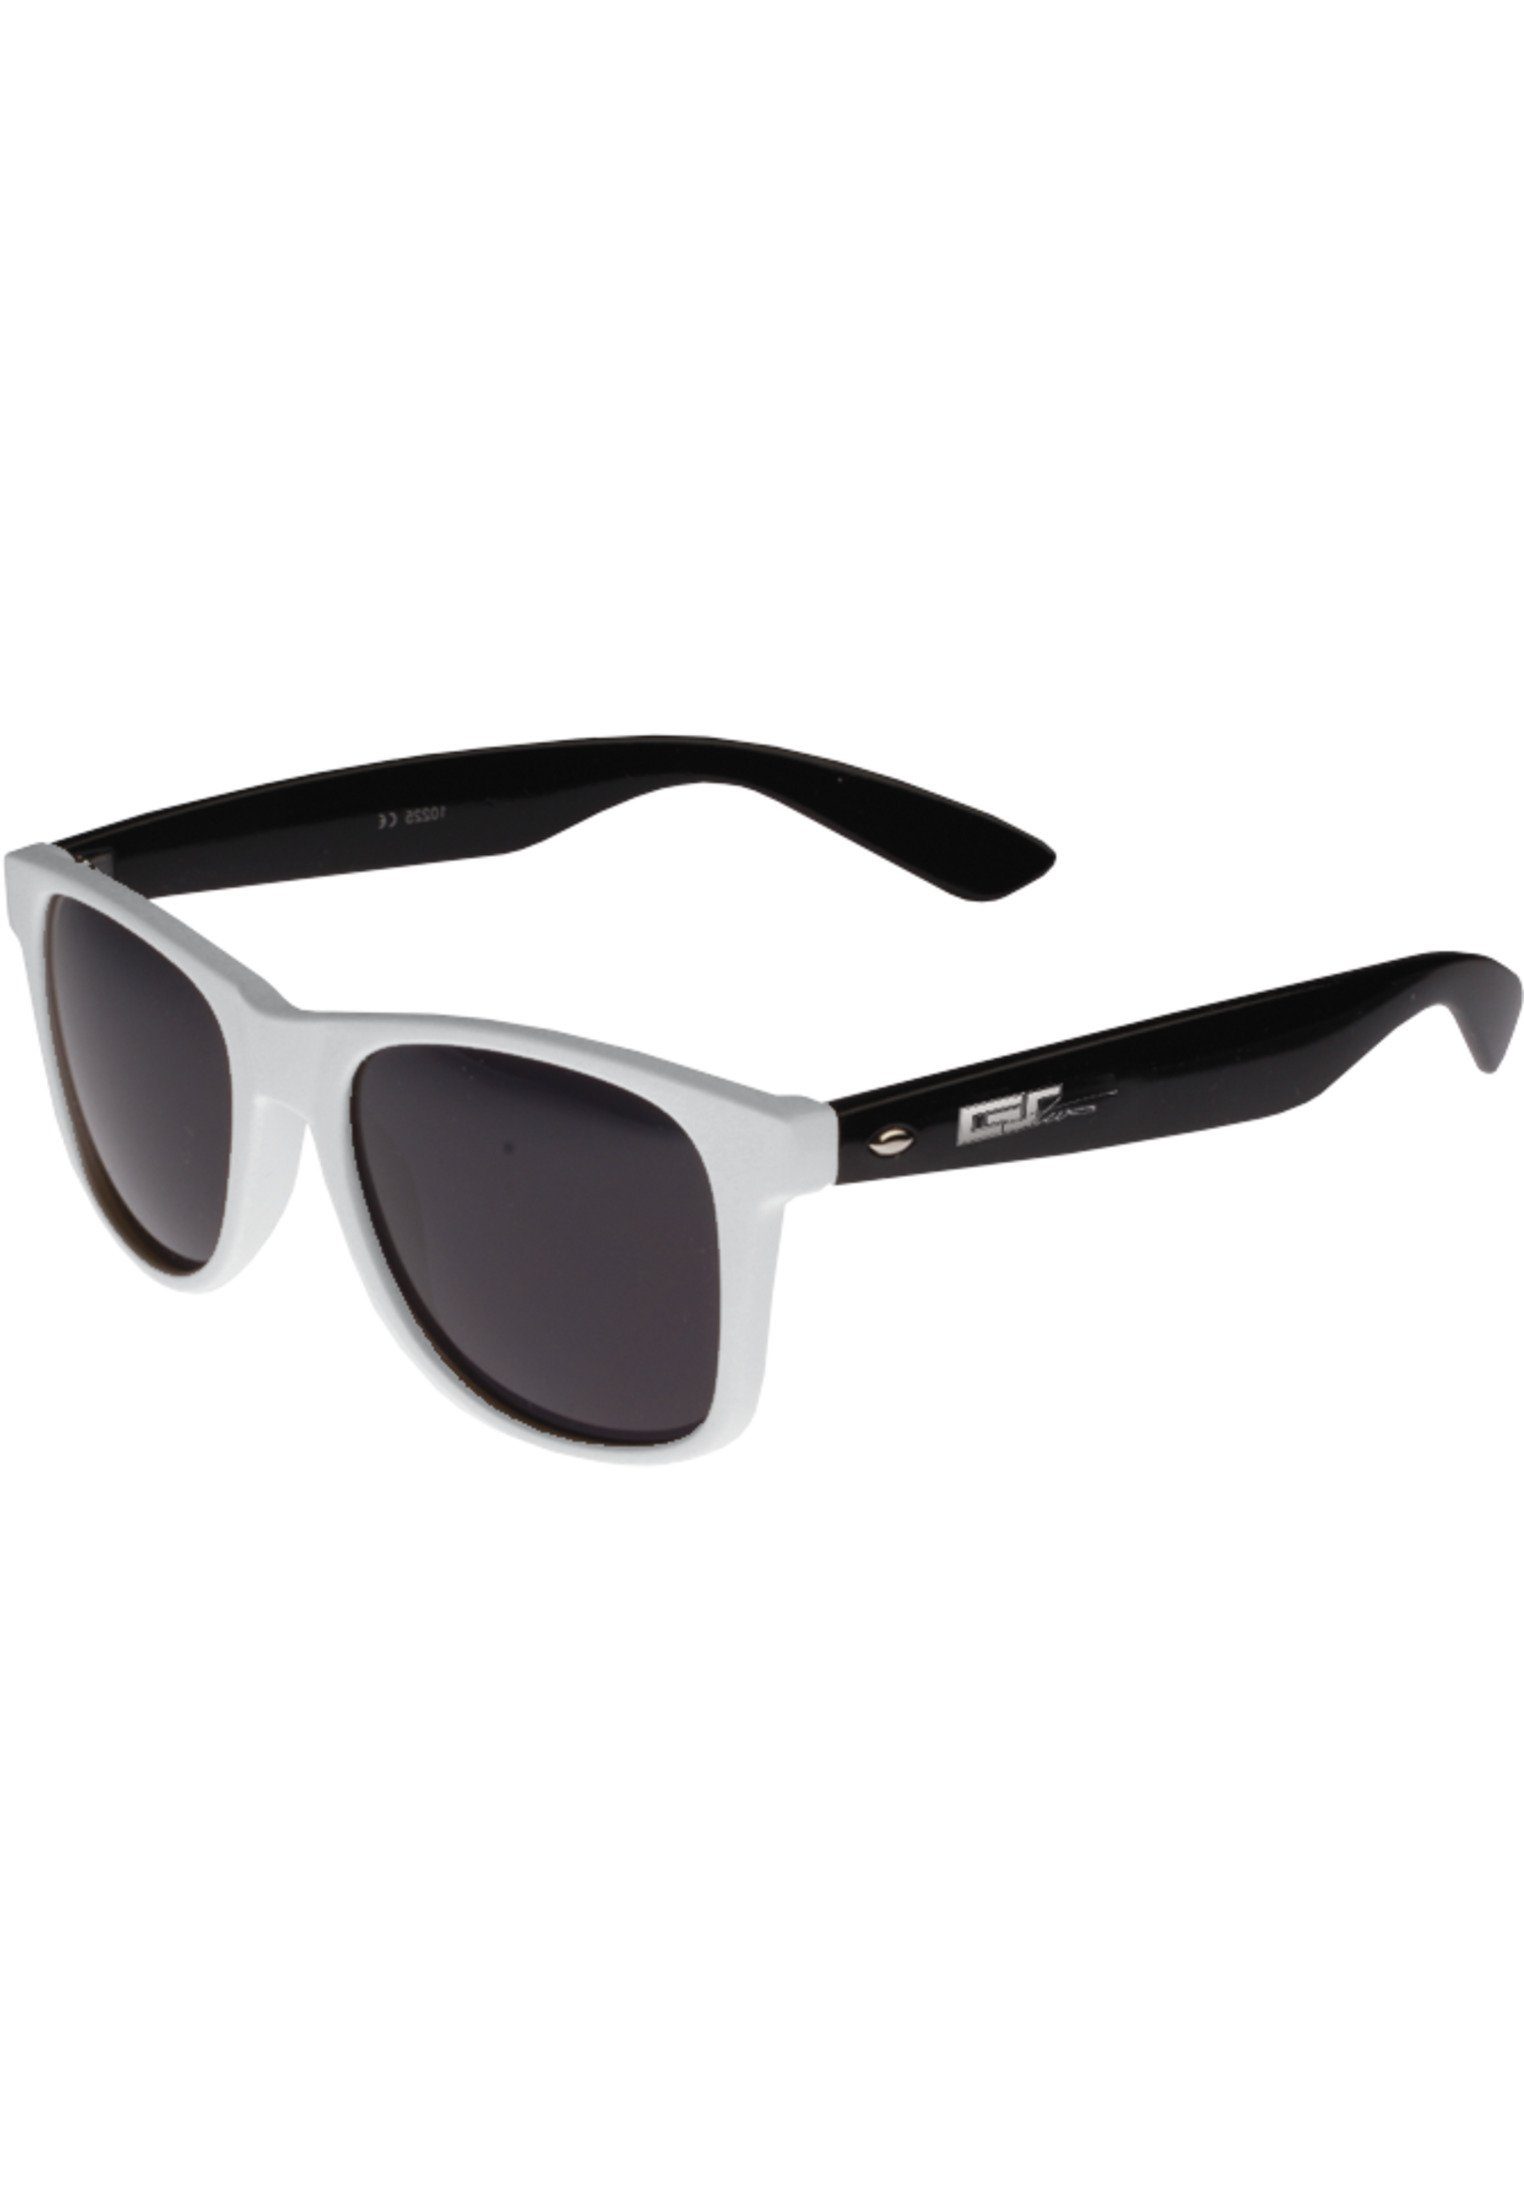 MSTRDS Sonnenbrille Accessoires white/black Groove Shades GStwo